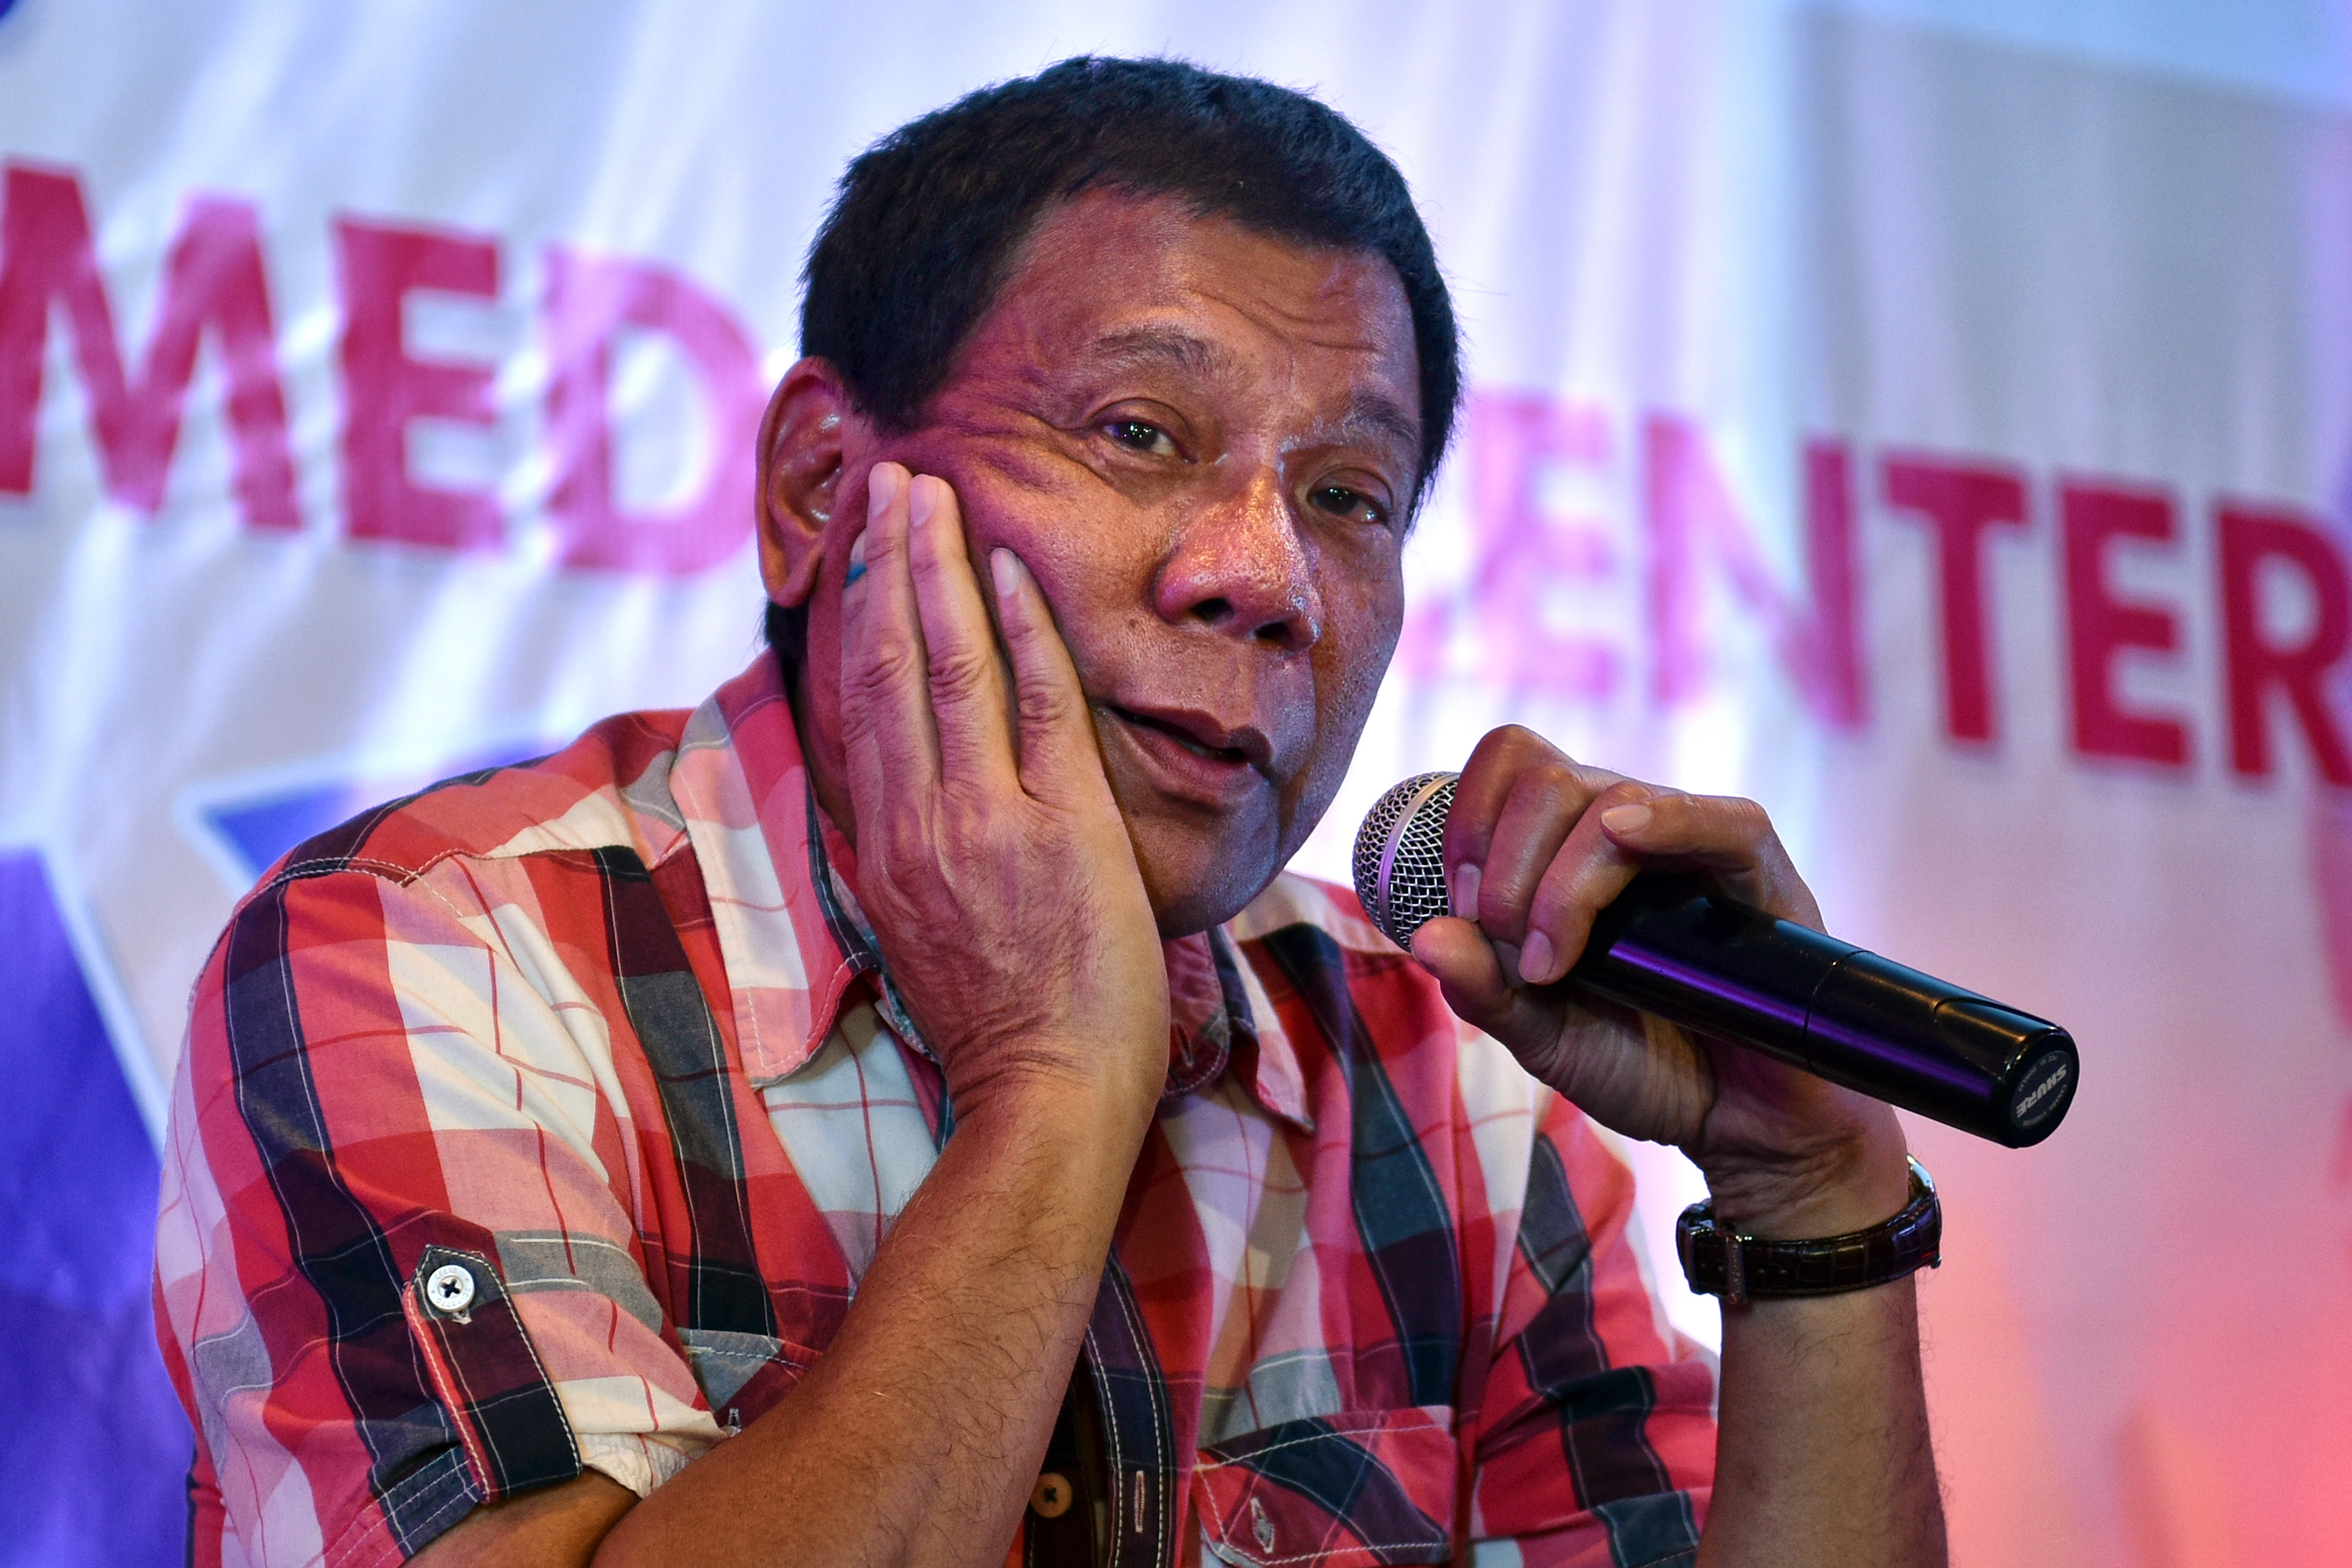 Rodrigo Duterte answers questions from journalists during a press conference on May 10, 2016, in Davao City, the Philippines (Jes Aznar—Getty Images)